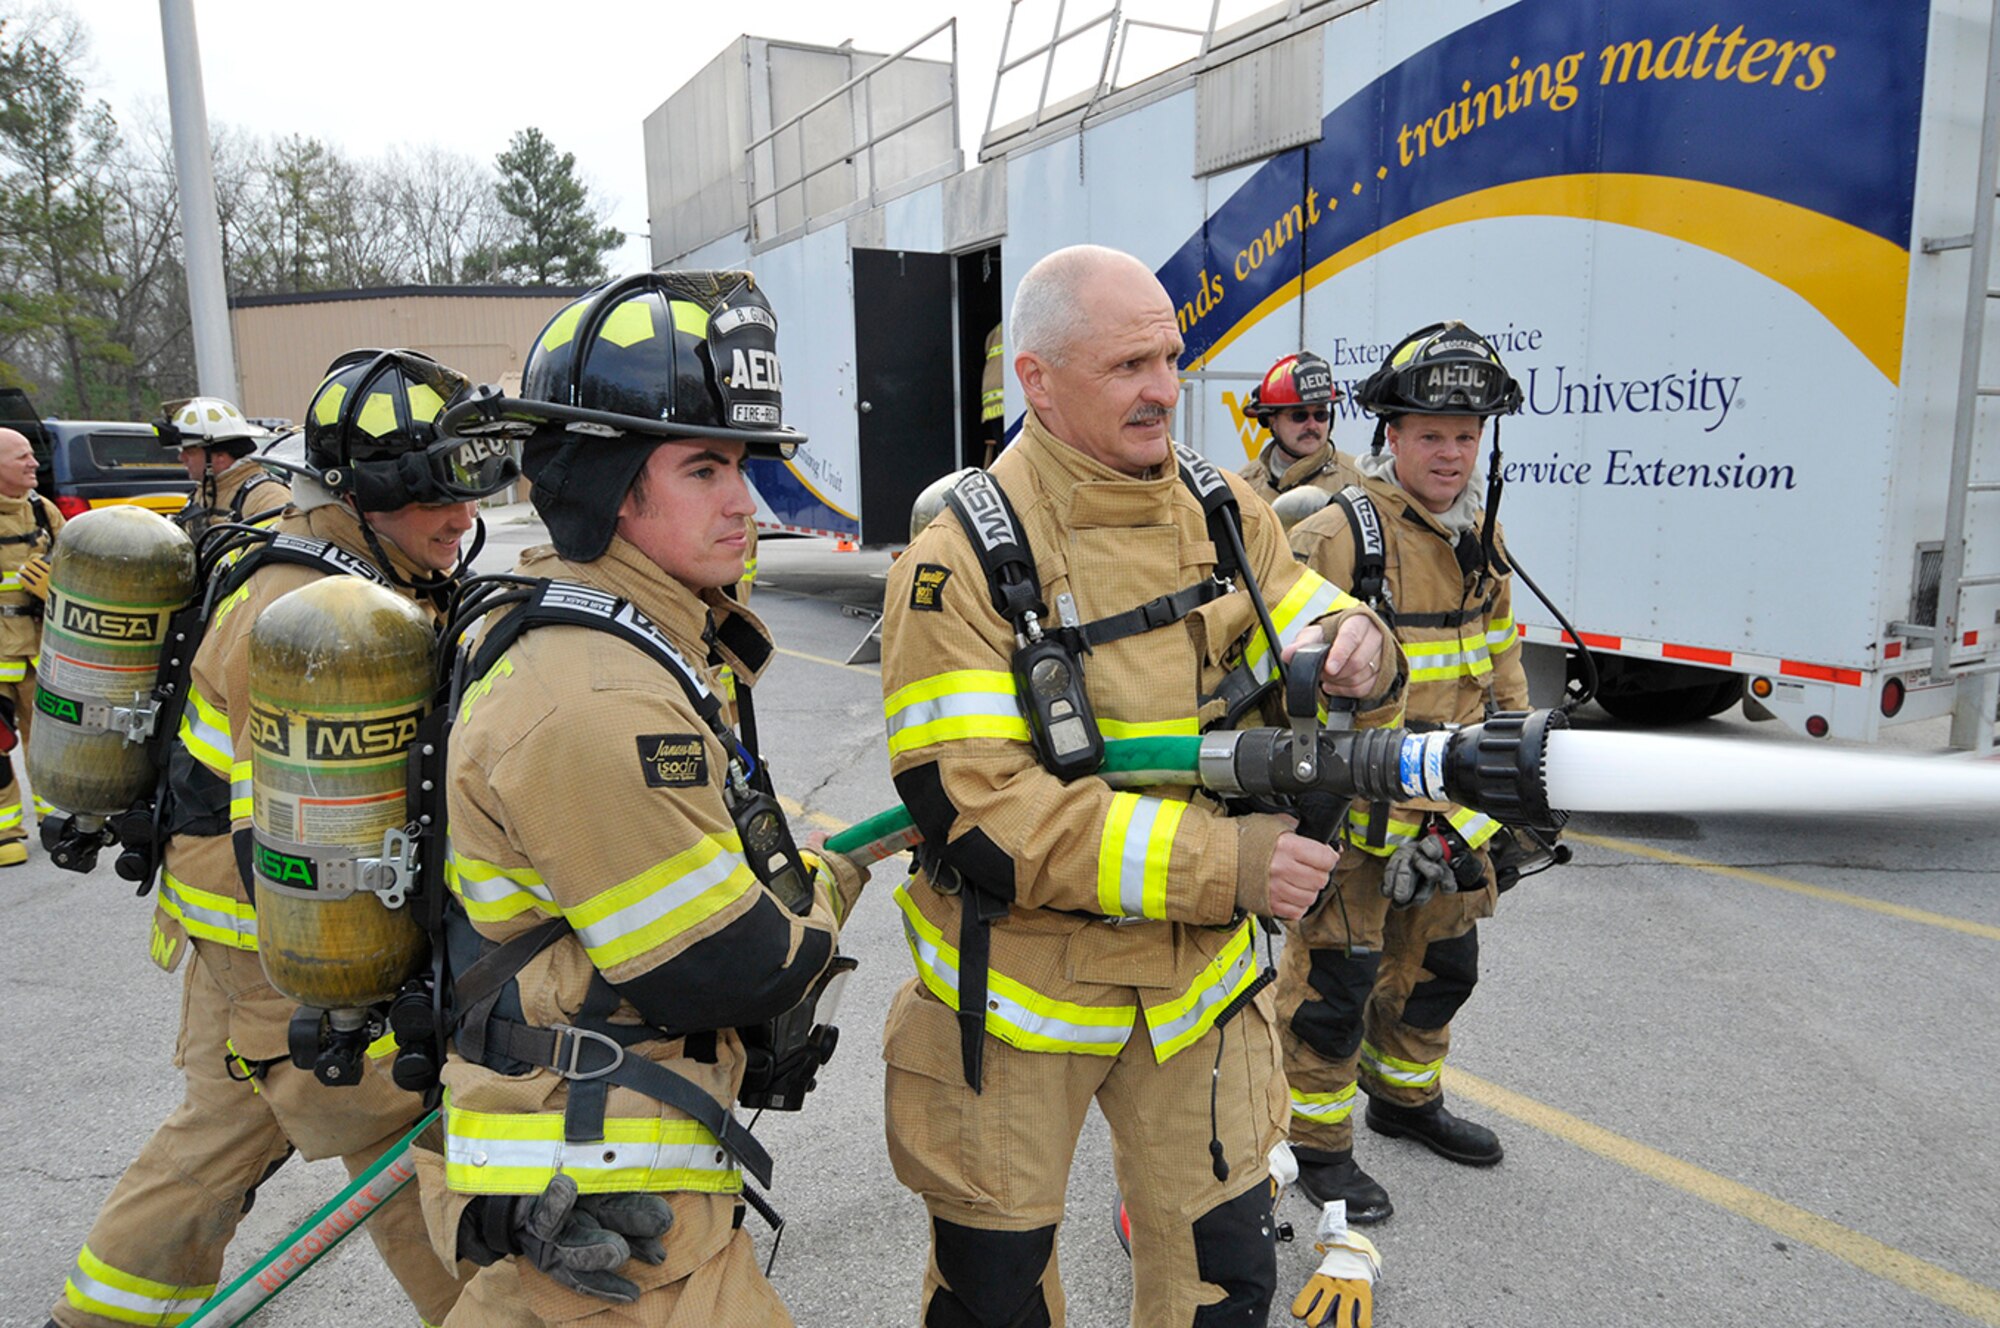 During a recent visit to Arnold Engineering Development Complex (AEDC), Air Force Test Center Commander Maj. Gen. Arnold Bunch (third from left) prepares for live structure fire training with AEDC Firefighter Brandon Gunn (second from left). Gunn explains the operation of the variable stream fog nozzle to Bunch before training in the West Virginia University Fire Service Extension Service mobile burn trailer. Bunch, in full protective clothing, deploys a 1.75-inch hose line to combat multiple propane fueled fires in a smoke filled environment capable of reaching temperatures in excess of 1,200 degrees Fahrenheit. The purpose of the demonstration was to give the commander a greater sense of the demanding environment firefighters face during emergency operations. AEDC firefighters John Templeton (left) and AEDC Fire Department Driver Operator Ken Locker (right) also participate in the training. (Photo by Rick Goodfriend)